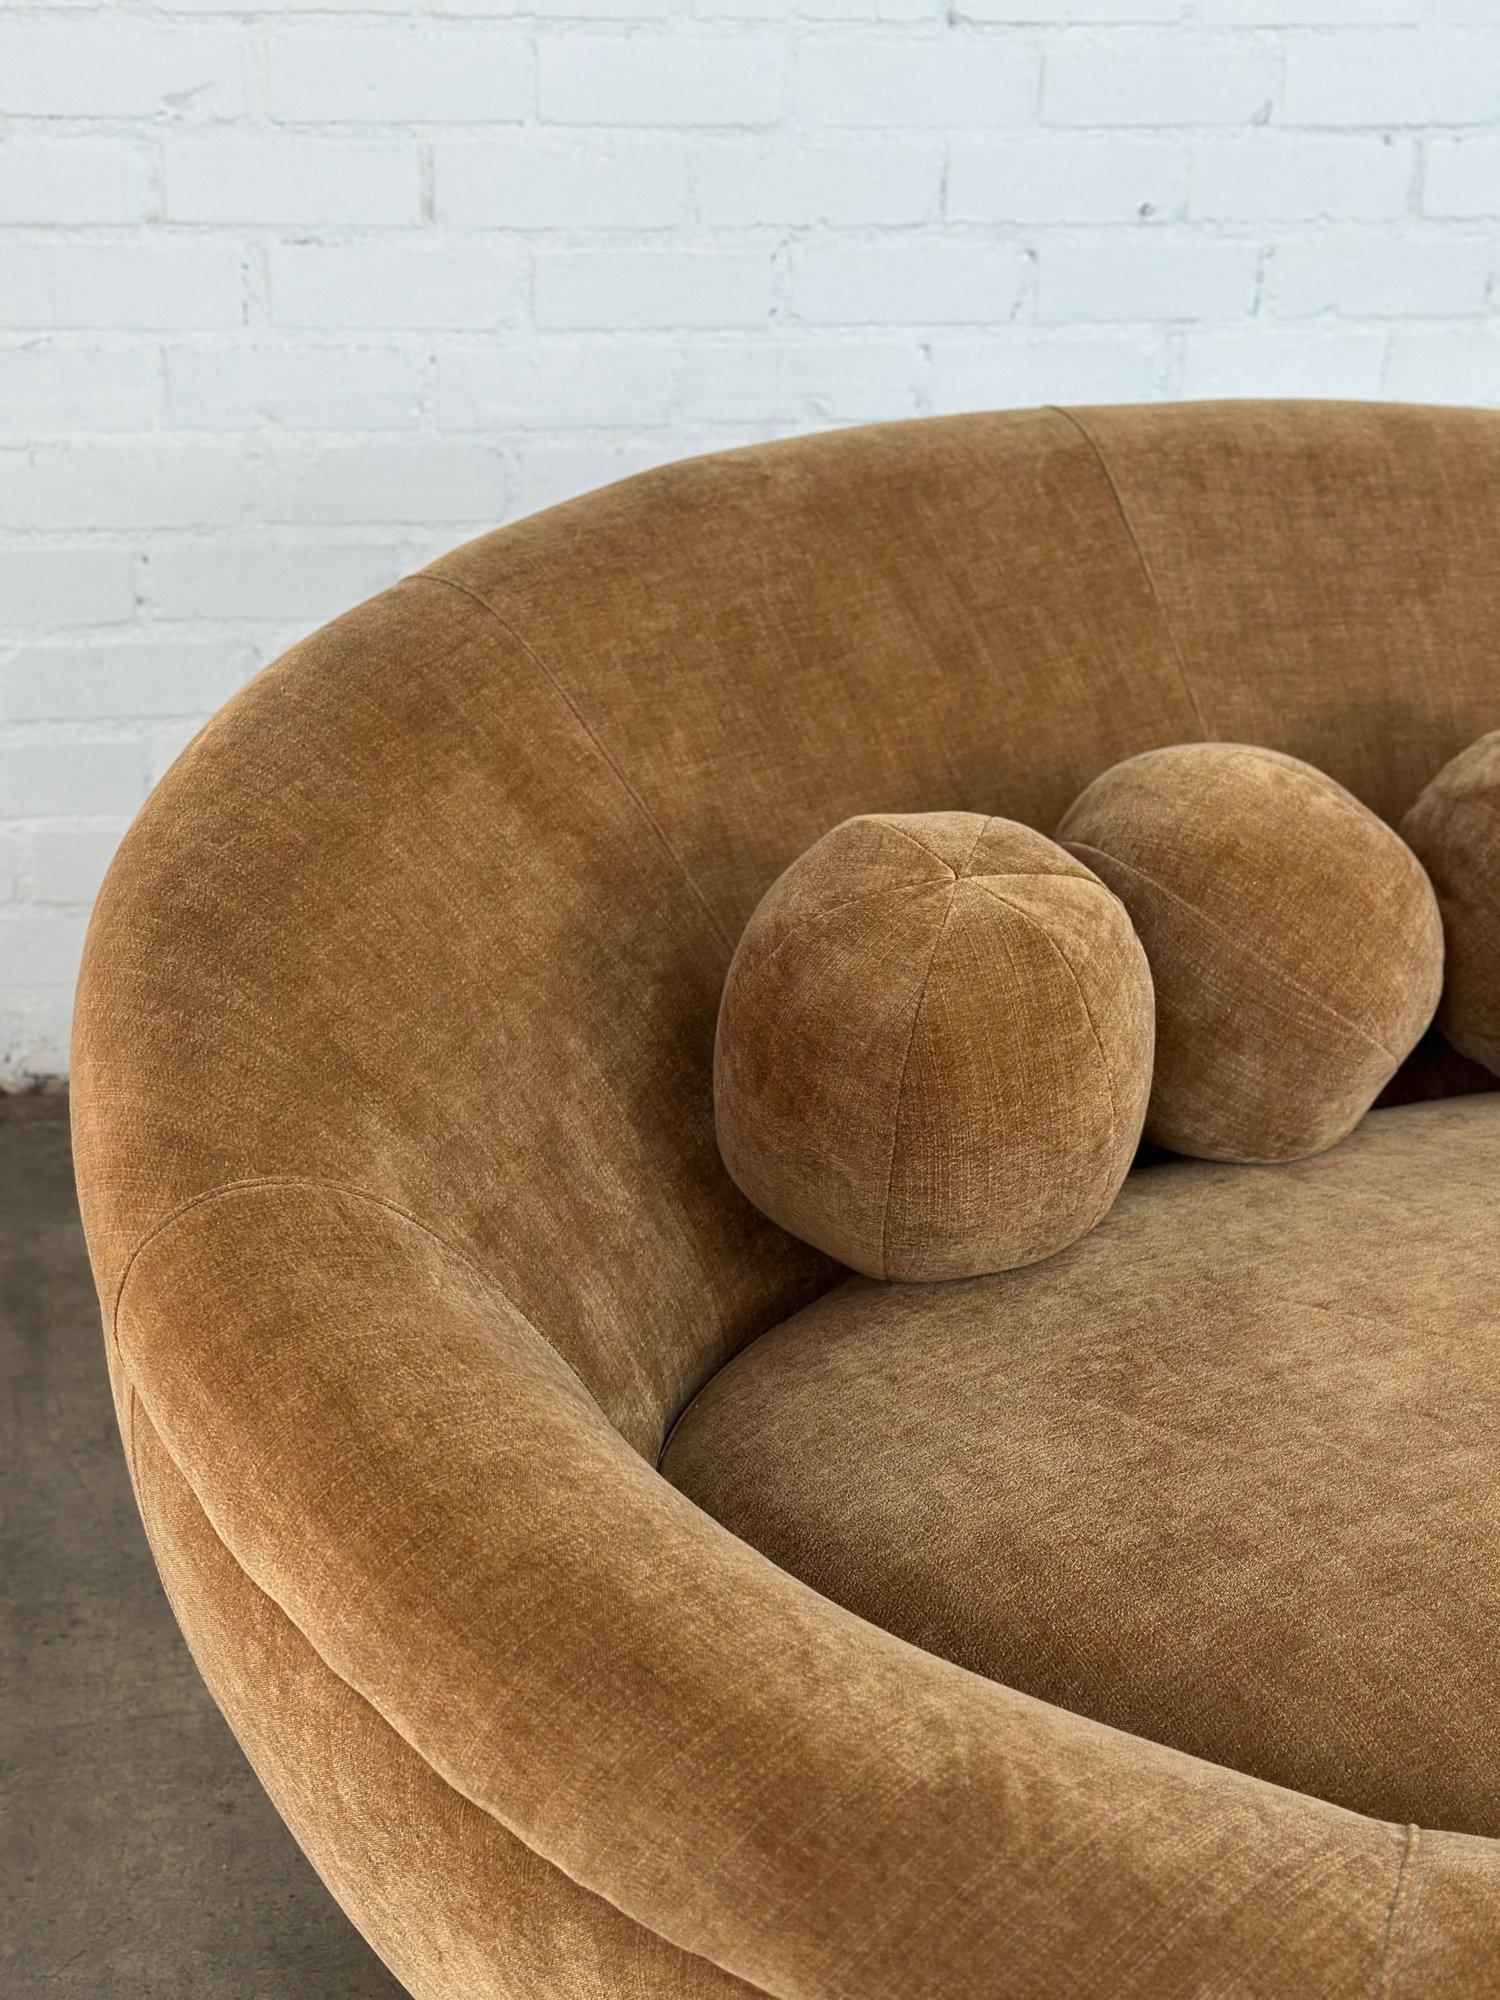 W80 D68 H33.5 SW59 SD45 SH17

Vintage UFO Sofa by Cellini, this is the larger version they made. Item is newly upholstered in a cognac chenille. Sofa features four custom made orb pillows.